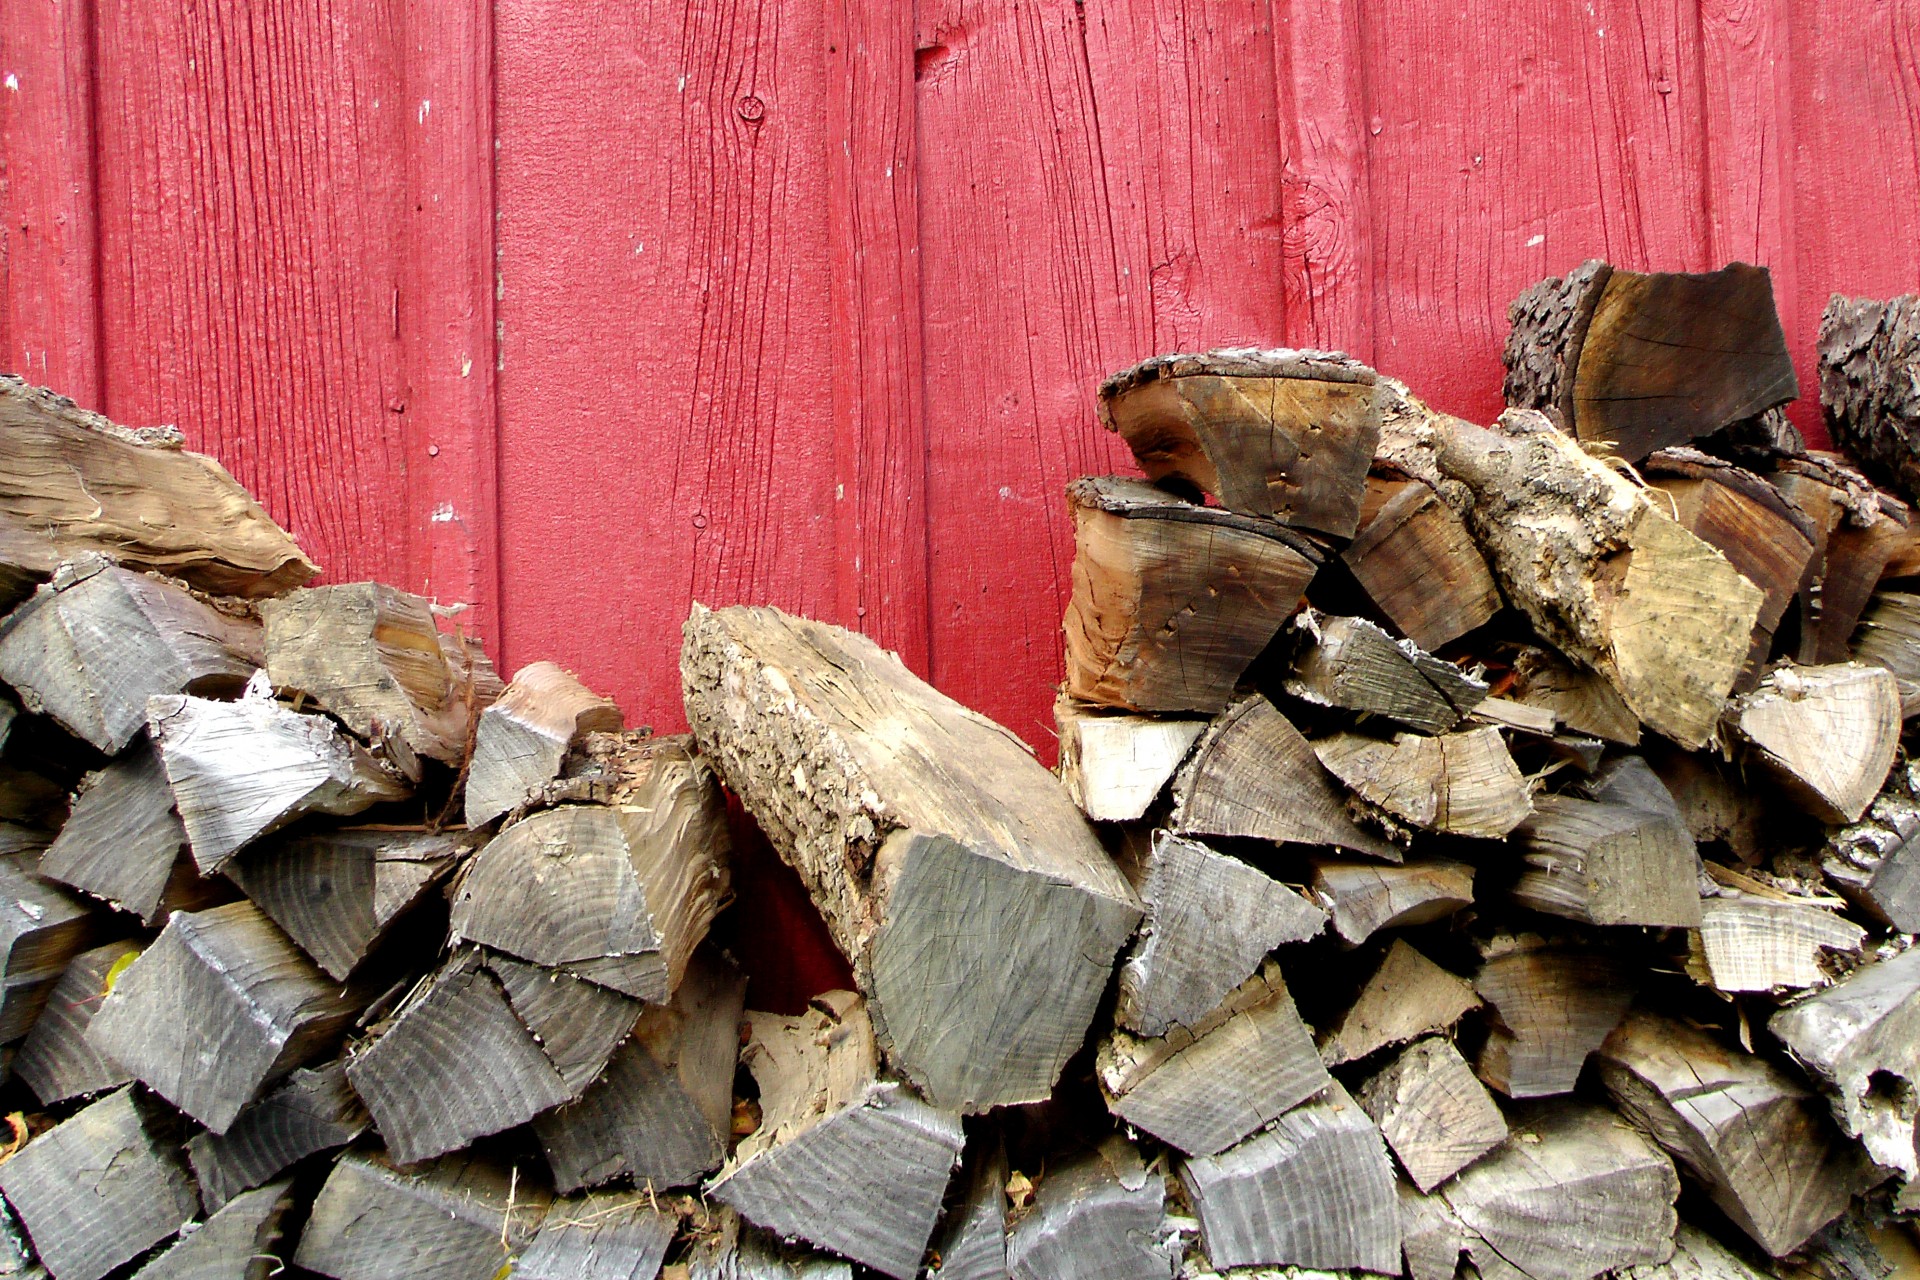 Red painted barn in Amish country with chopped wood piled against it